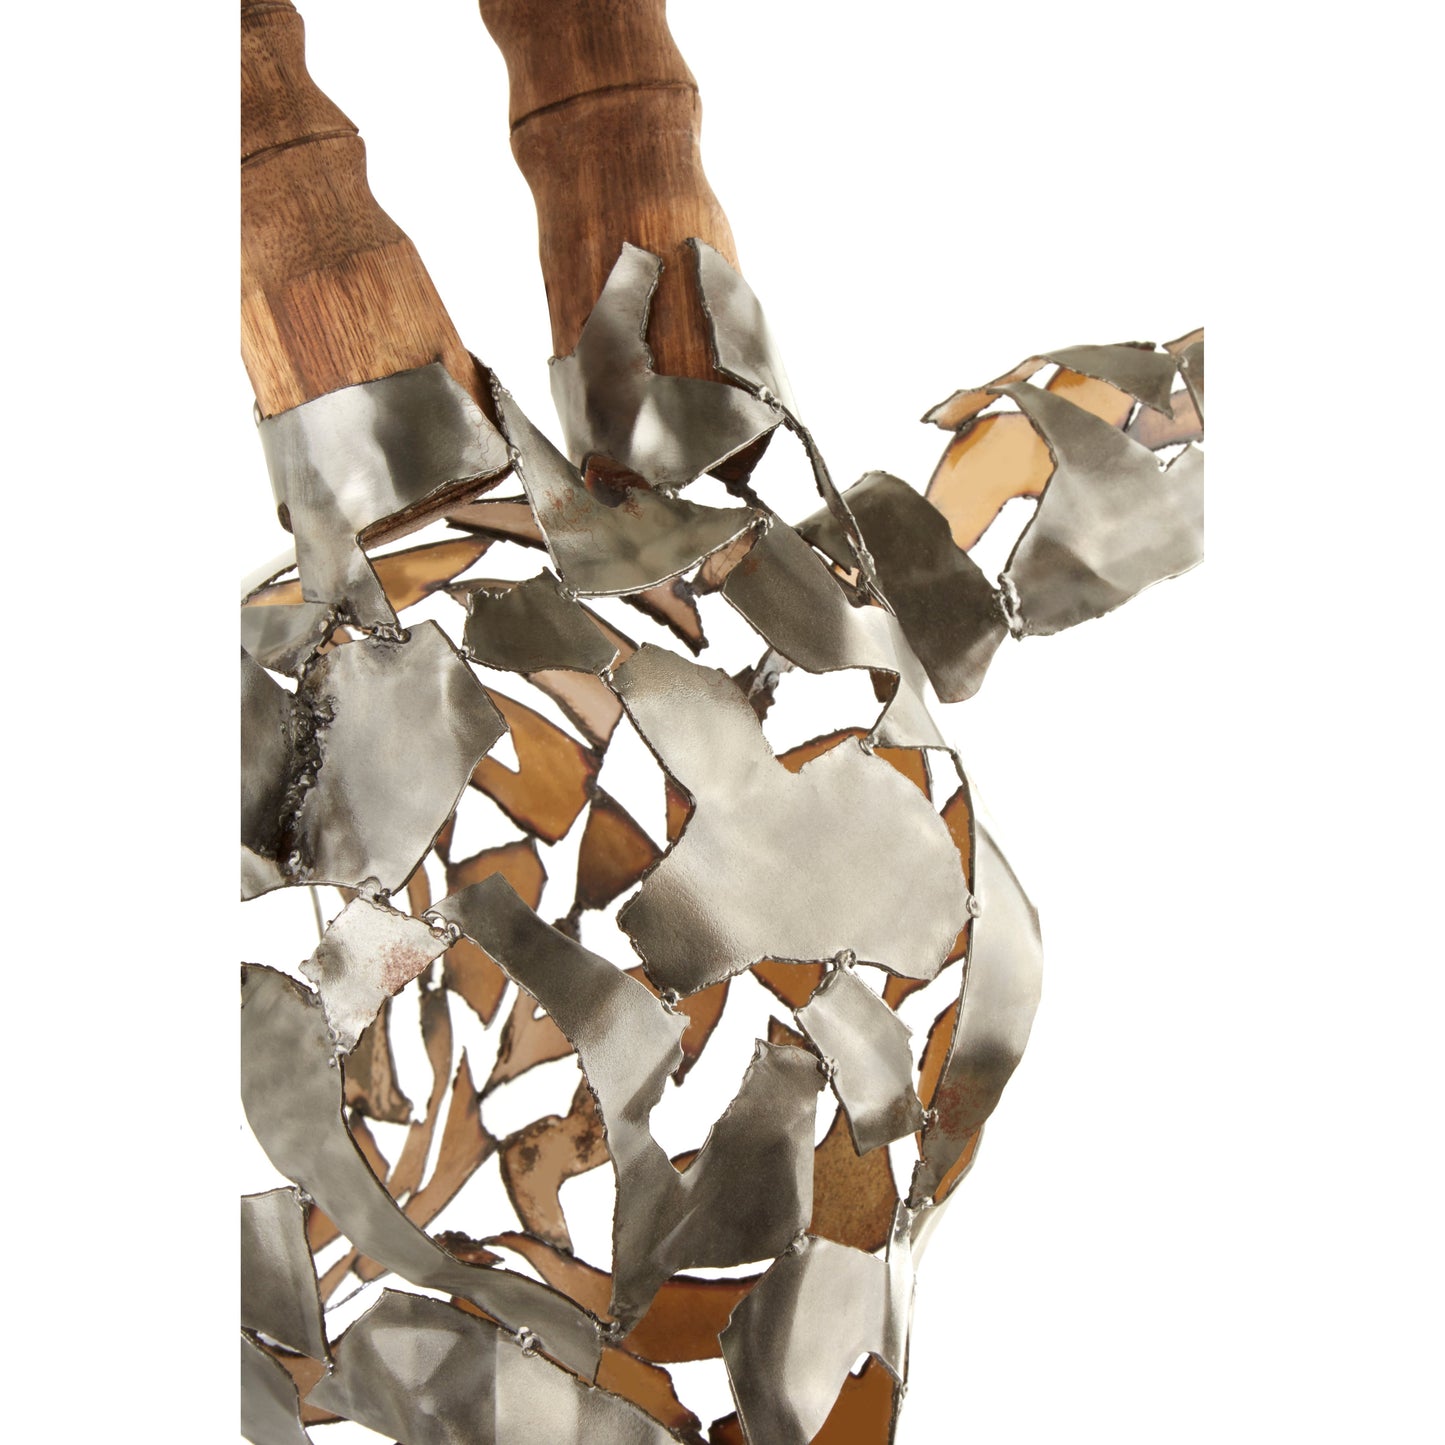 The Mad Max Antelope Ornament, Recycled Metal Shards, Wall Ornament - The Happy Den